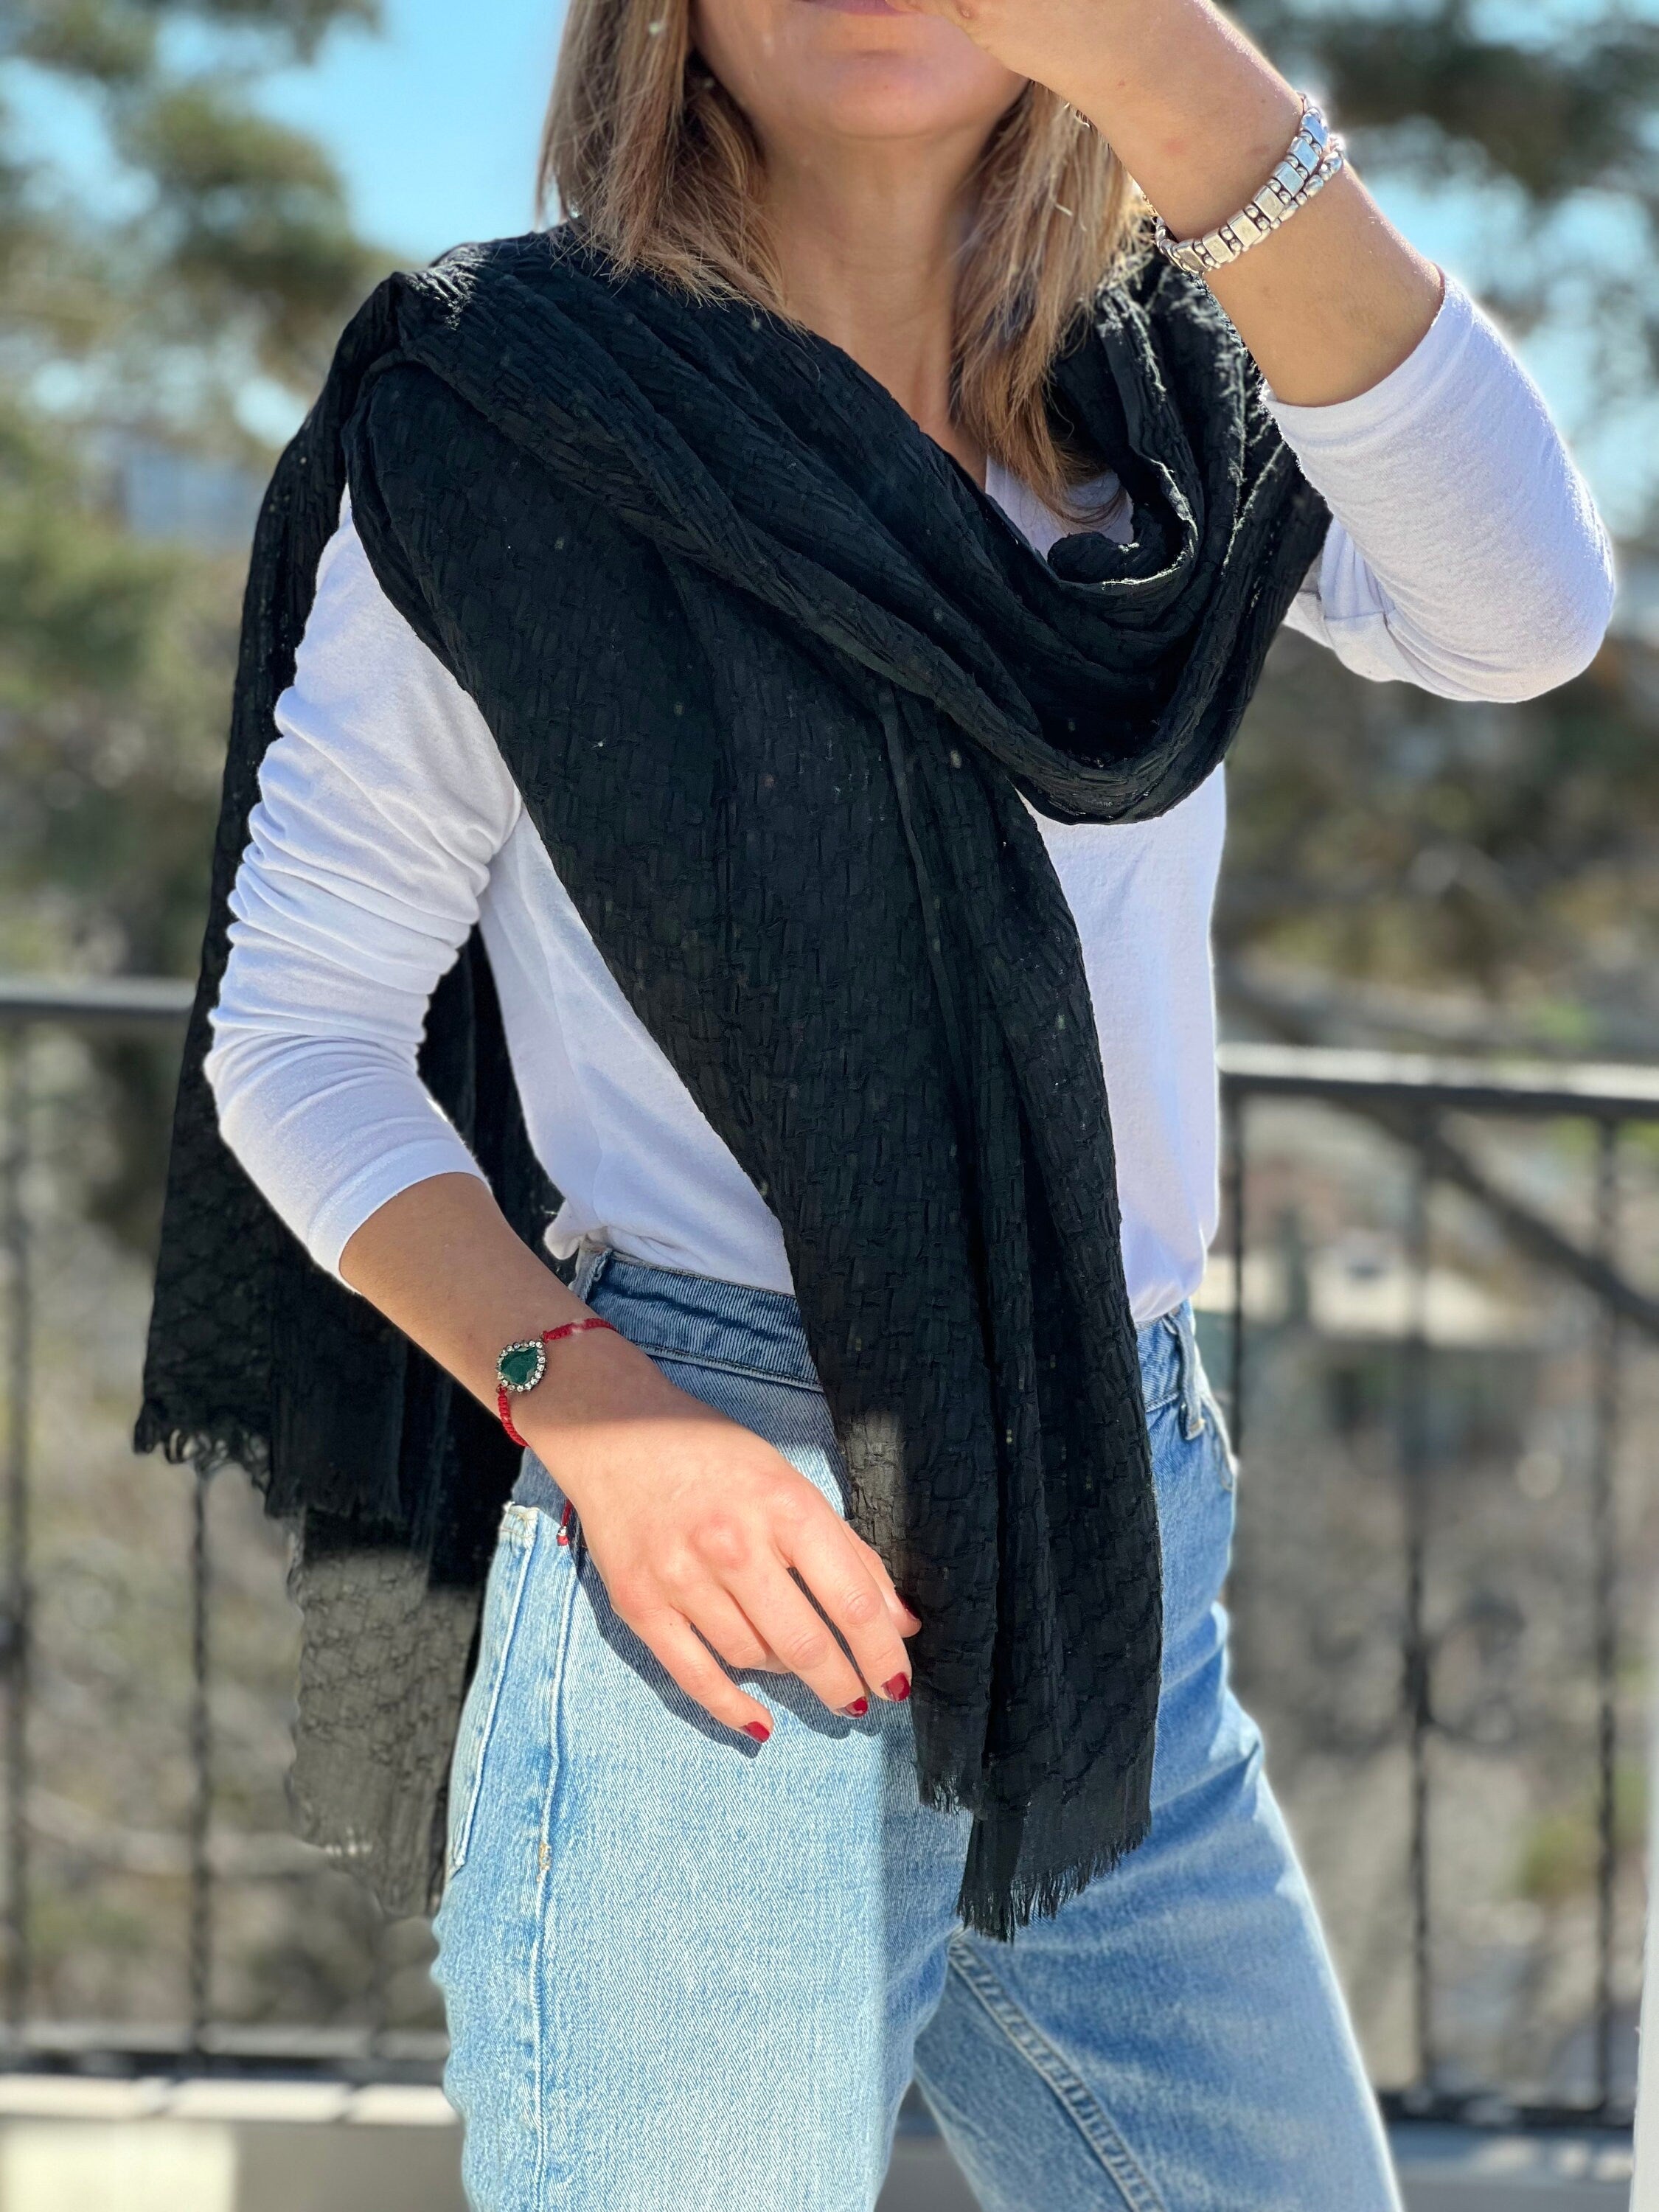 Stay comfortable and fashionable with our Black Anthracite Grey Scarf. Perfect for all seasons.